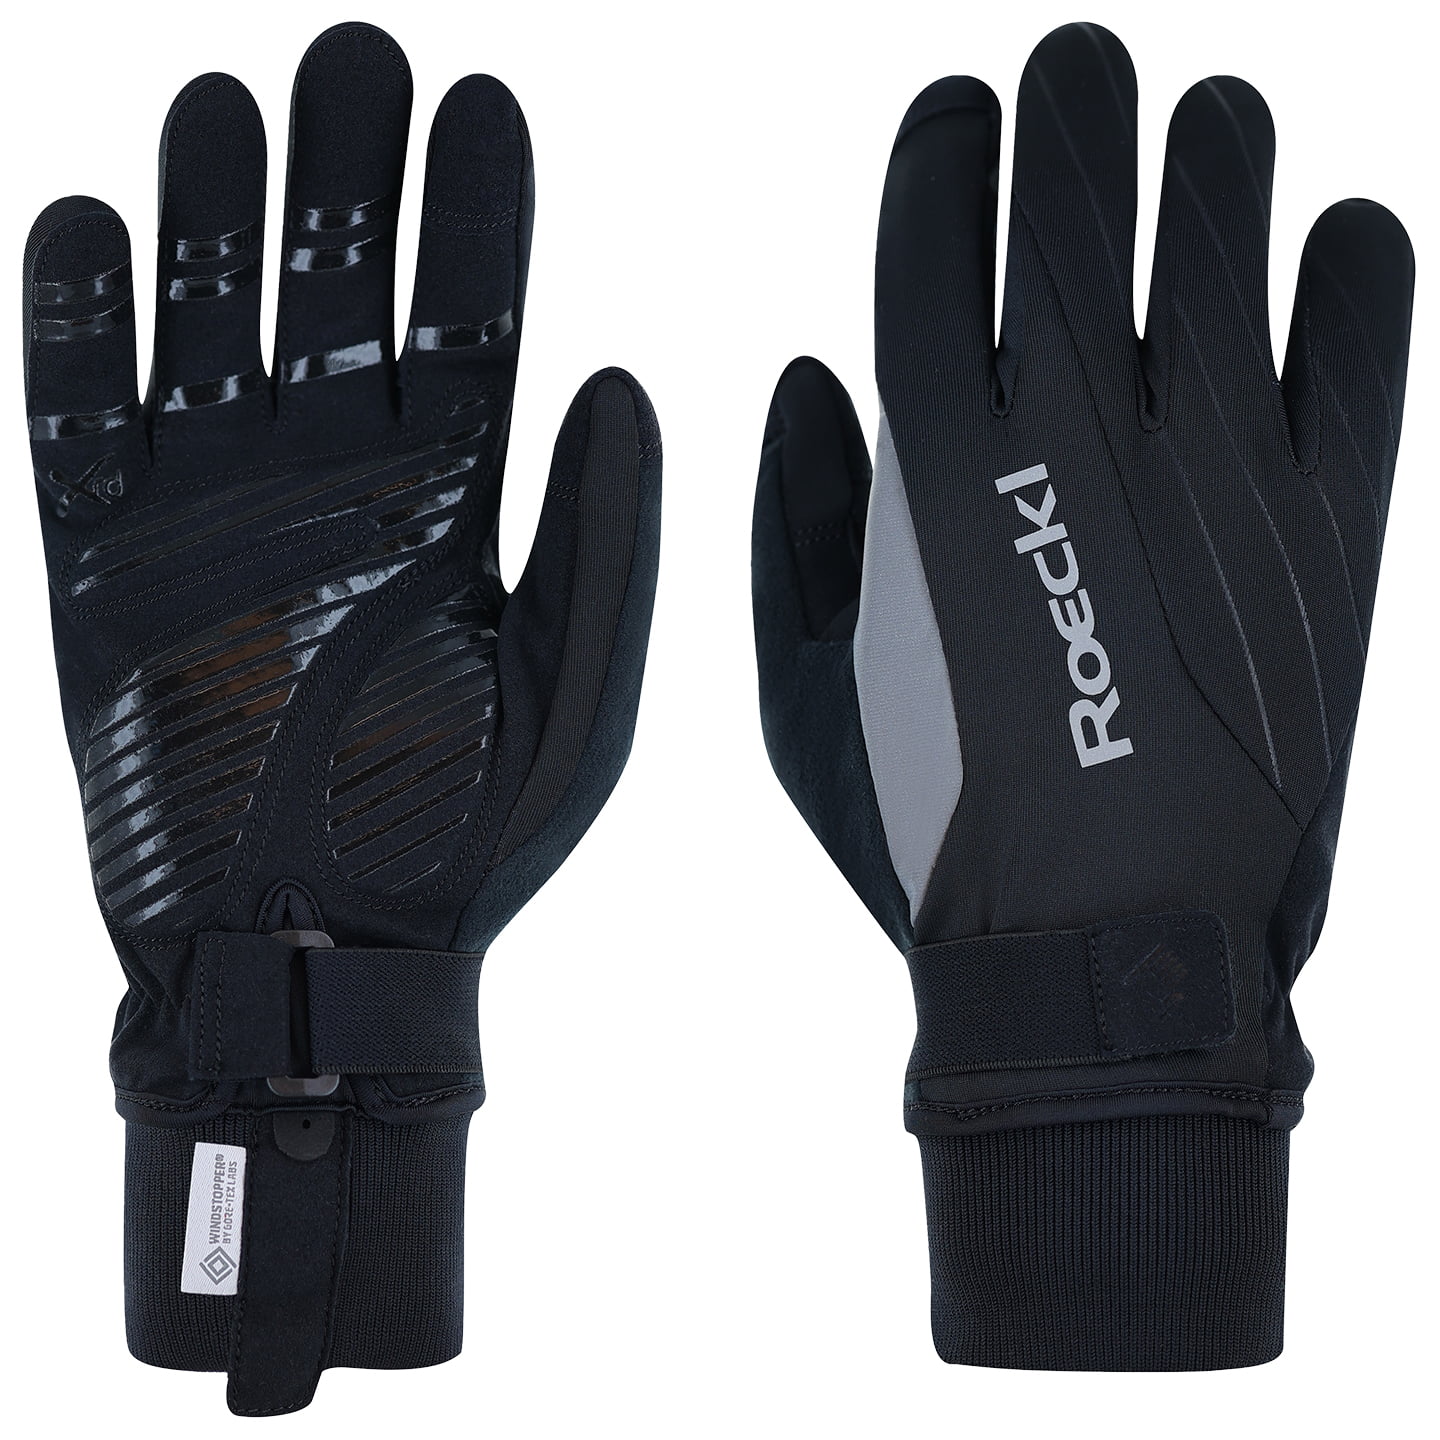 ROECKL Winter Gloves Ravensburg 2 Winter Cycling Gloves, for men, size 9,5, Bike gloves, Cycling wear